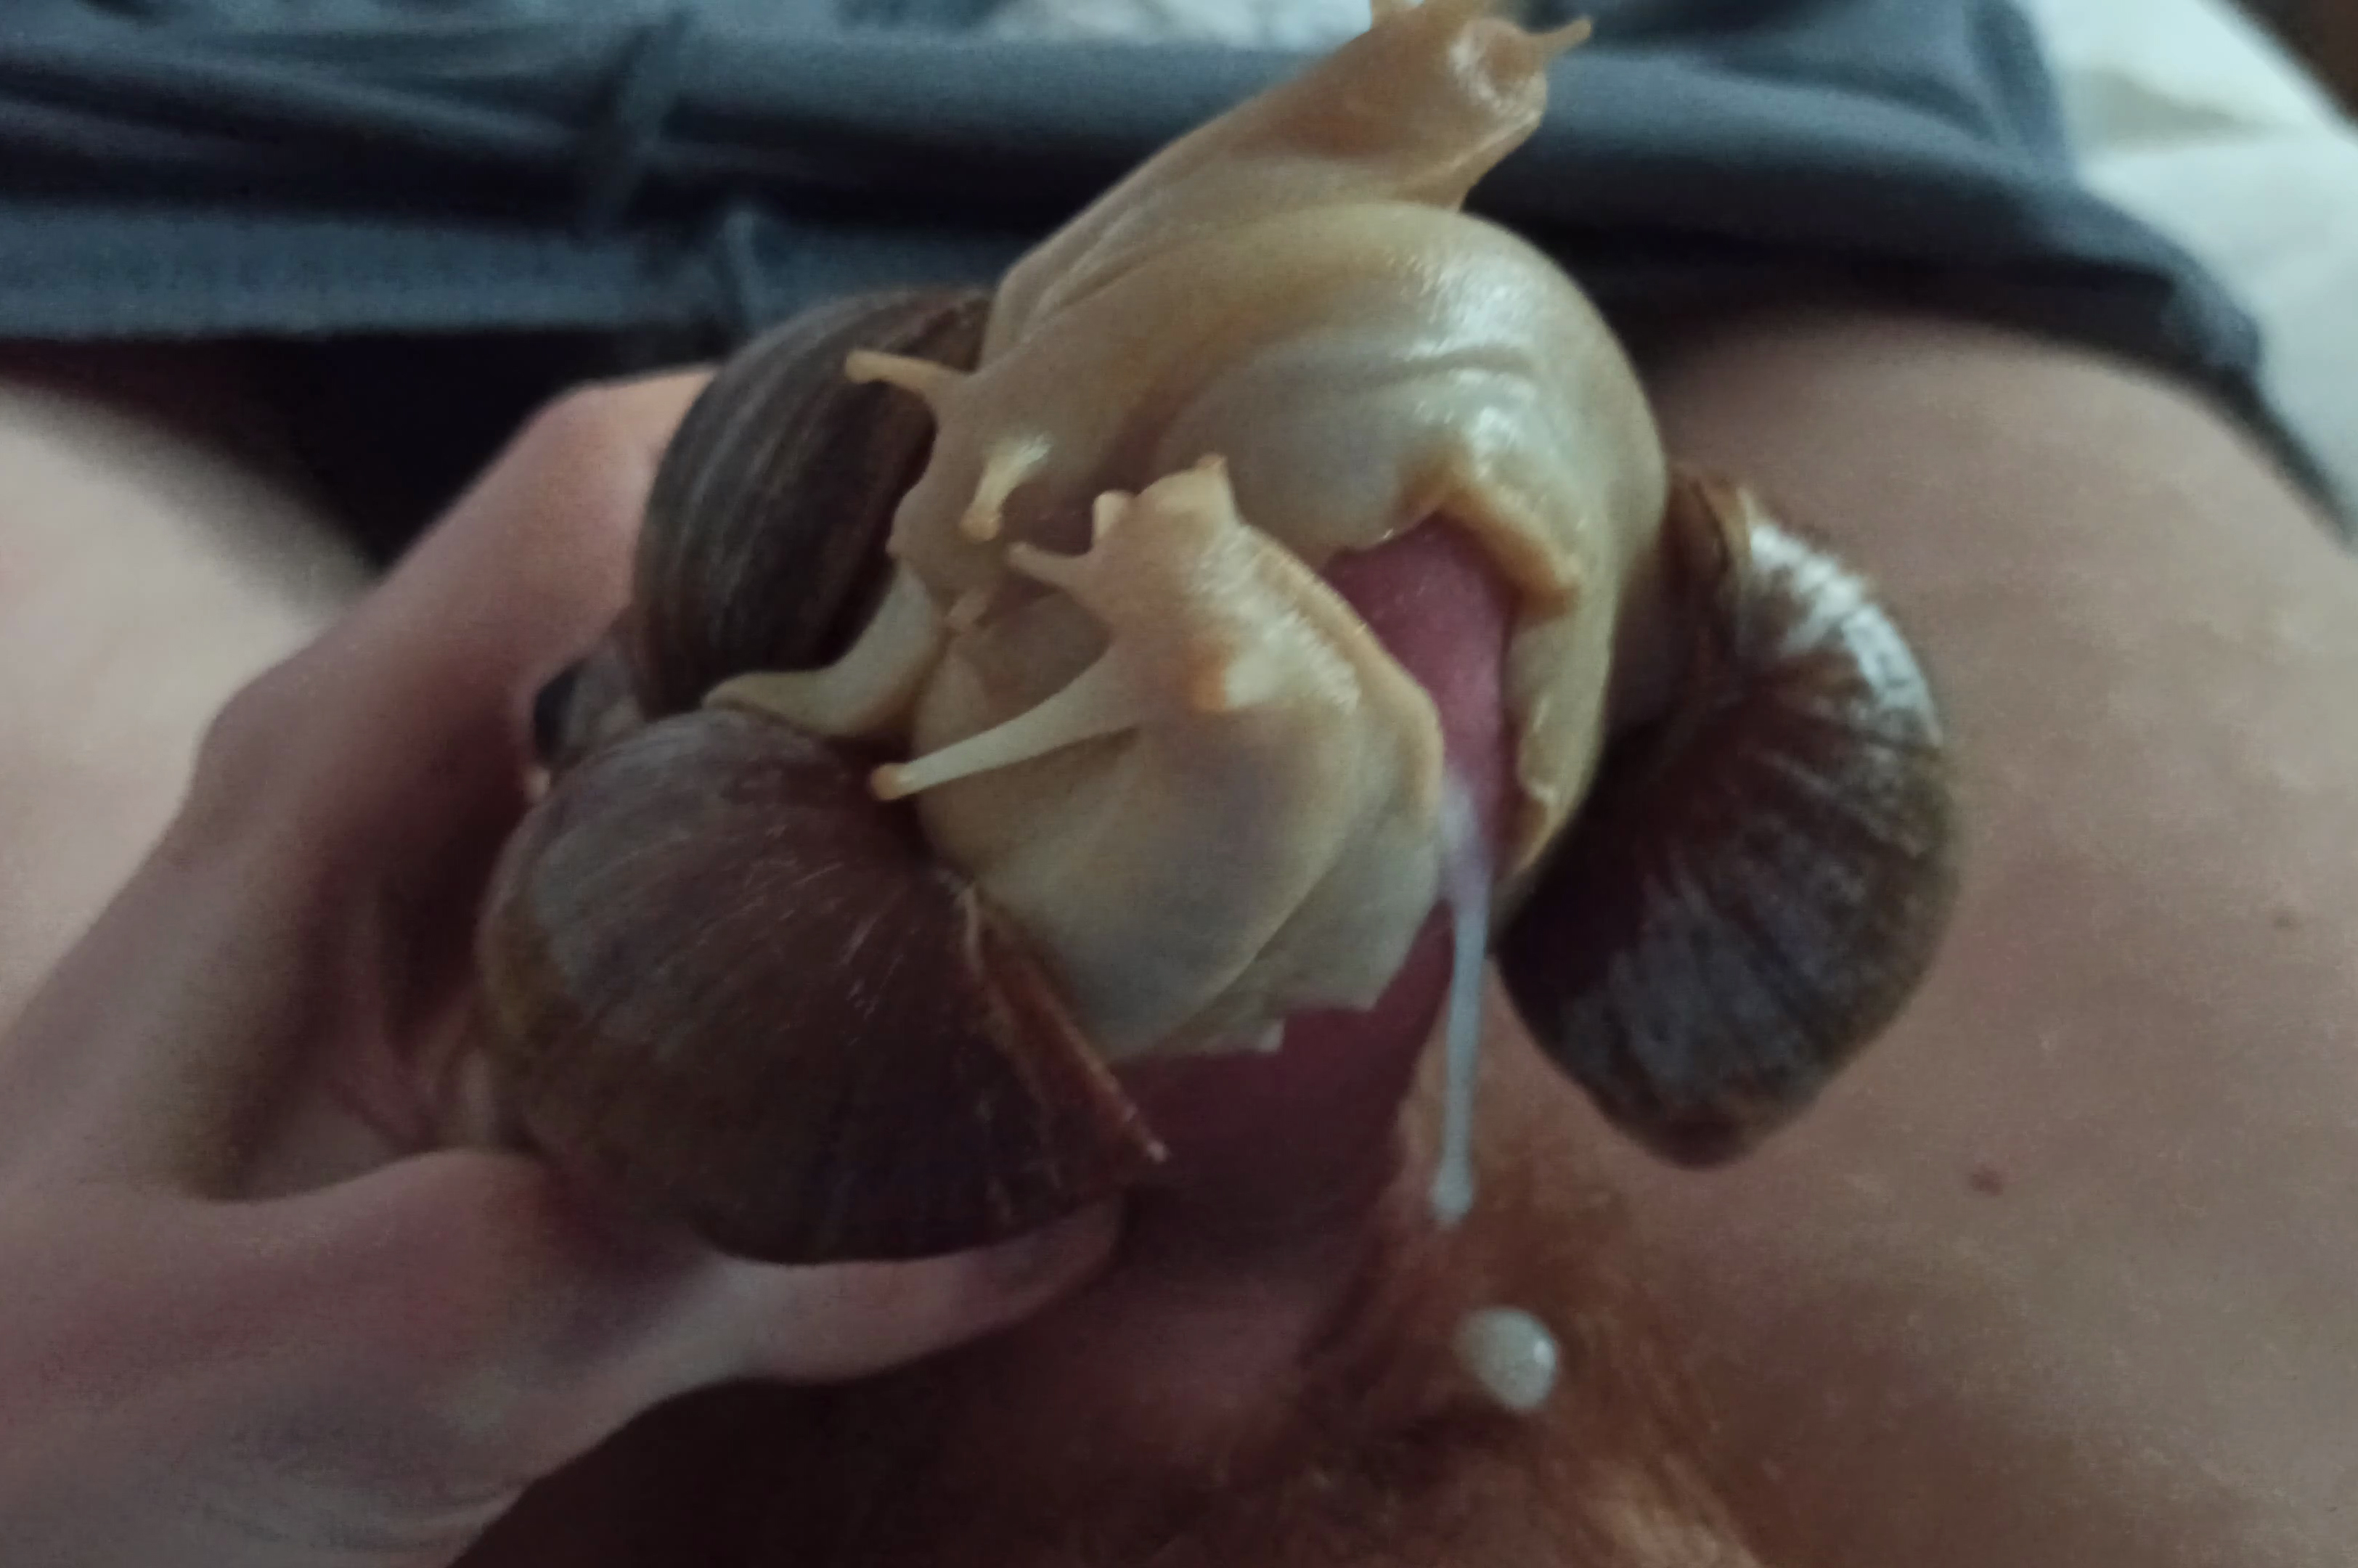 3 Giant snails dominate my cock and force me to cum